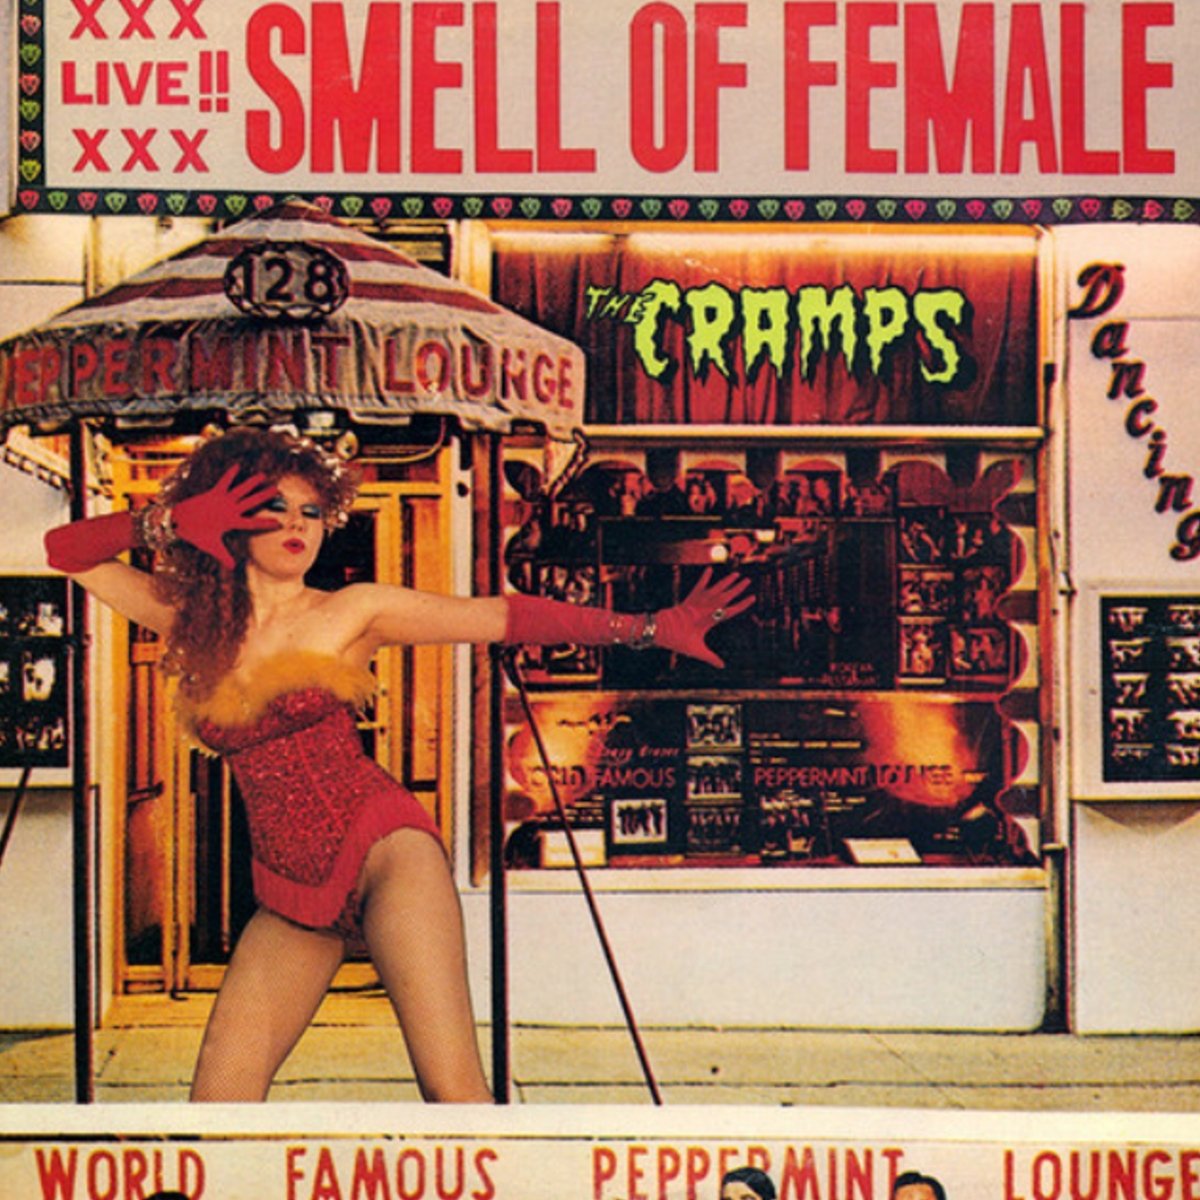 The Cramps - Smell Of Female Vinyl